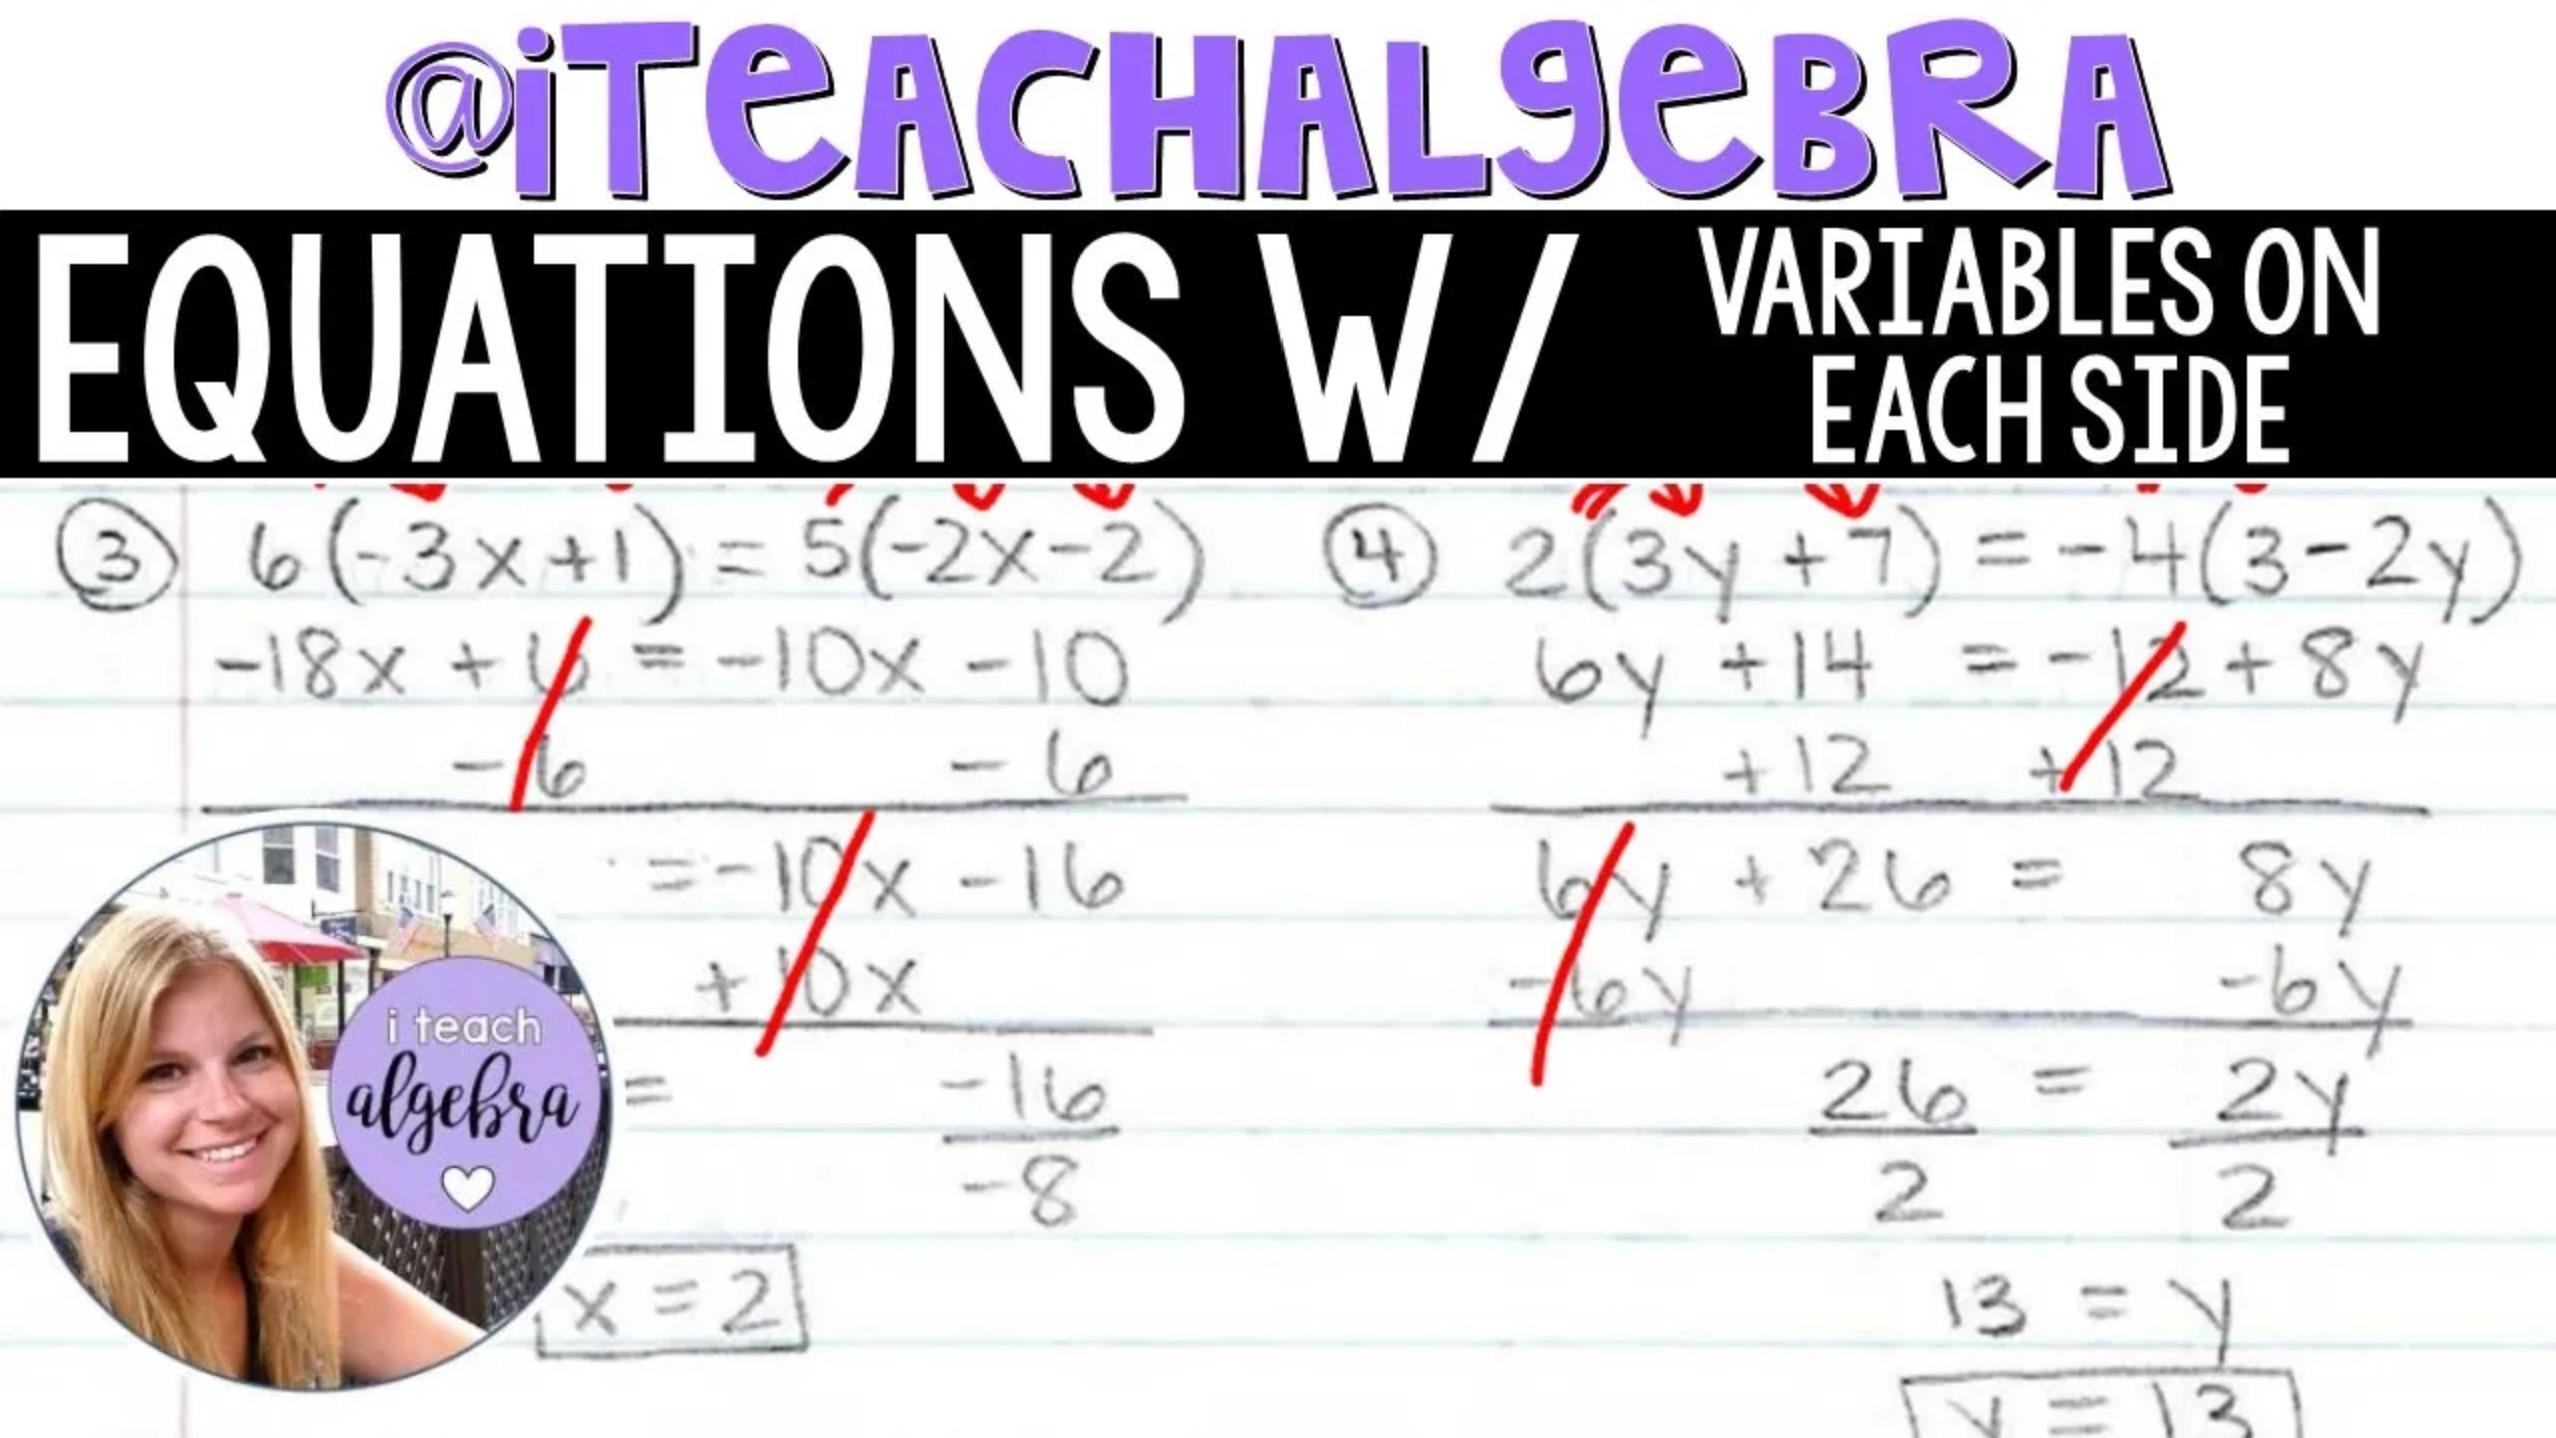 Algebra 1 - Solving Equations with Variables on Each Side